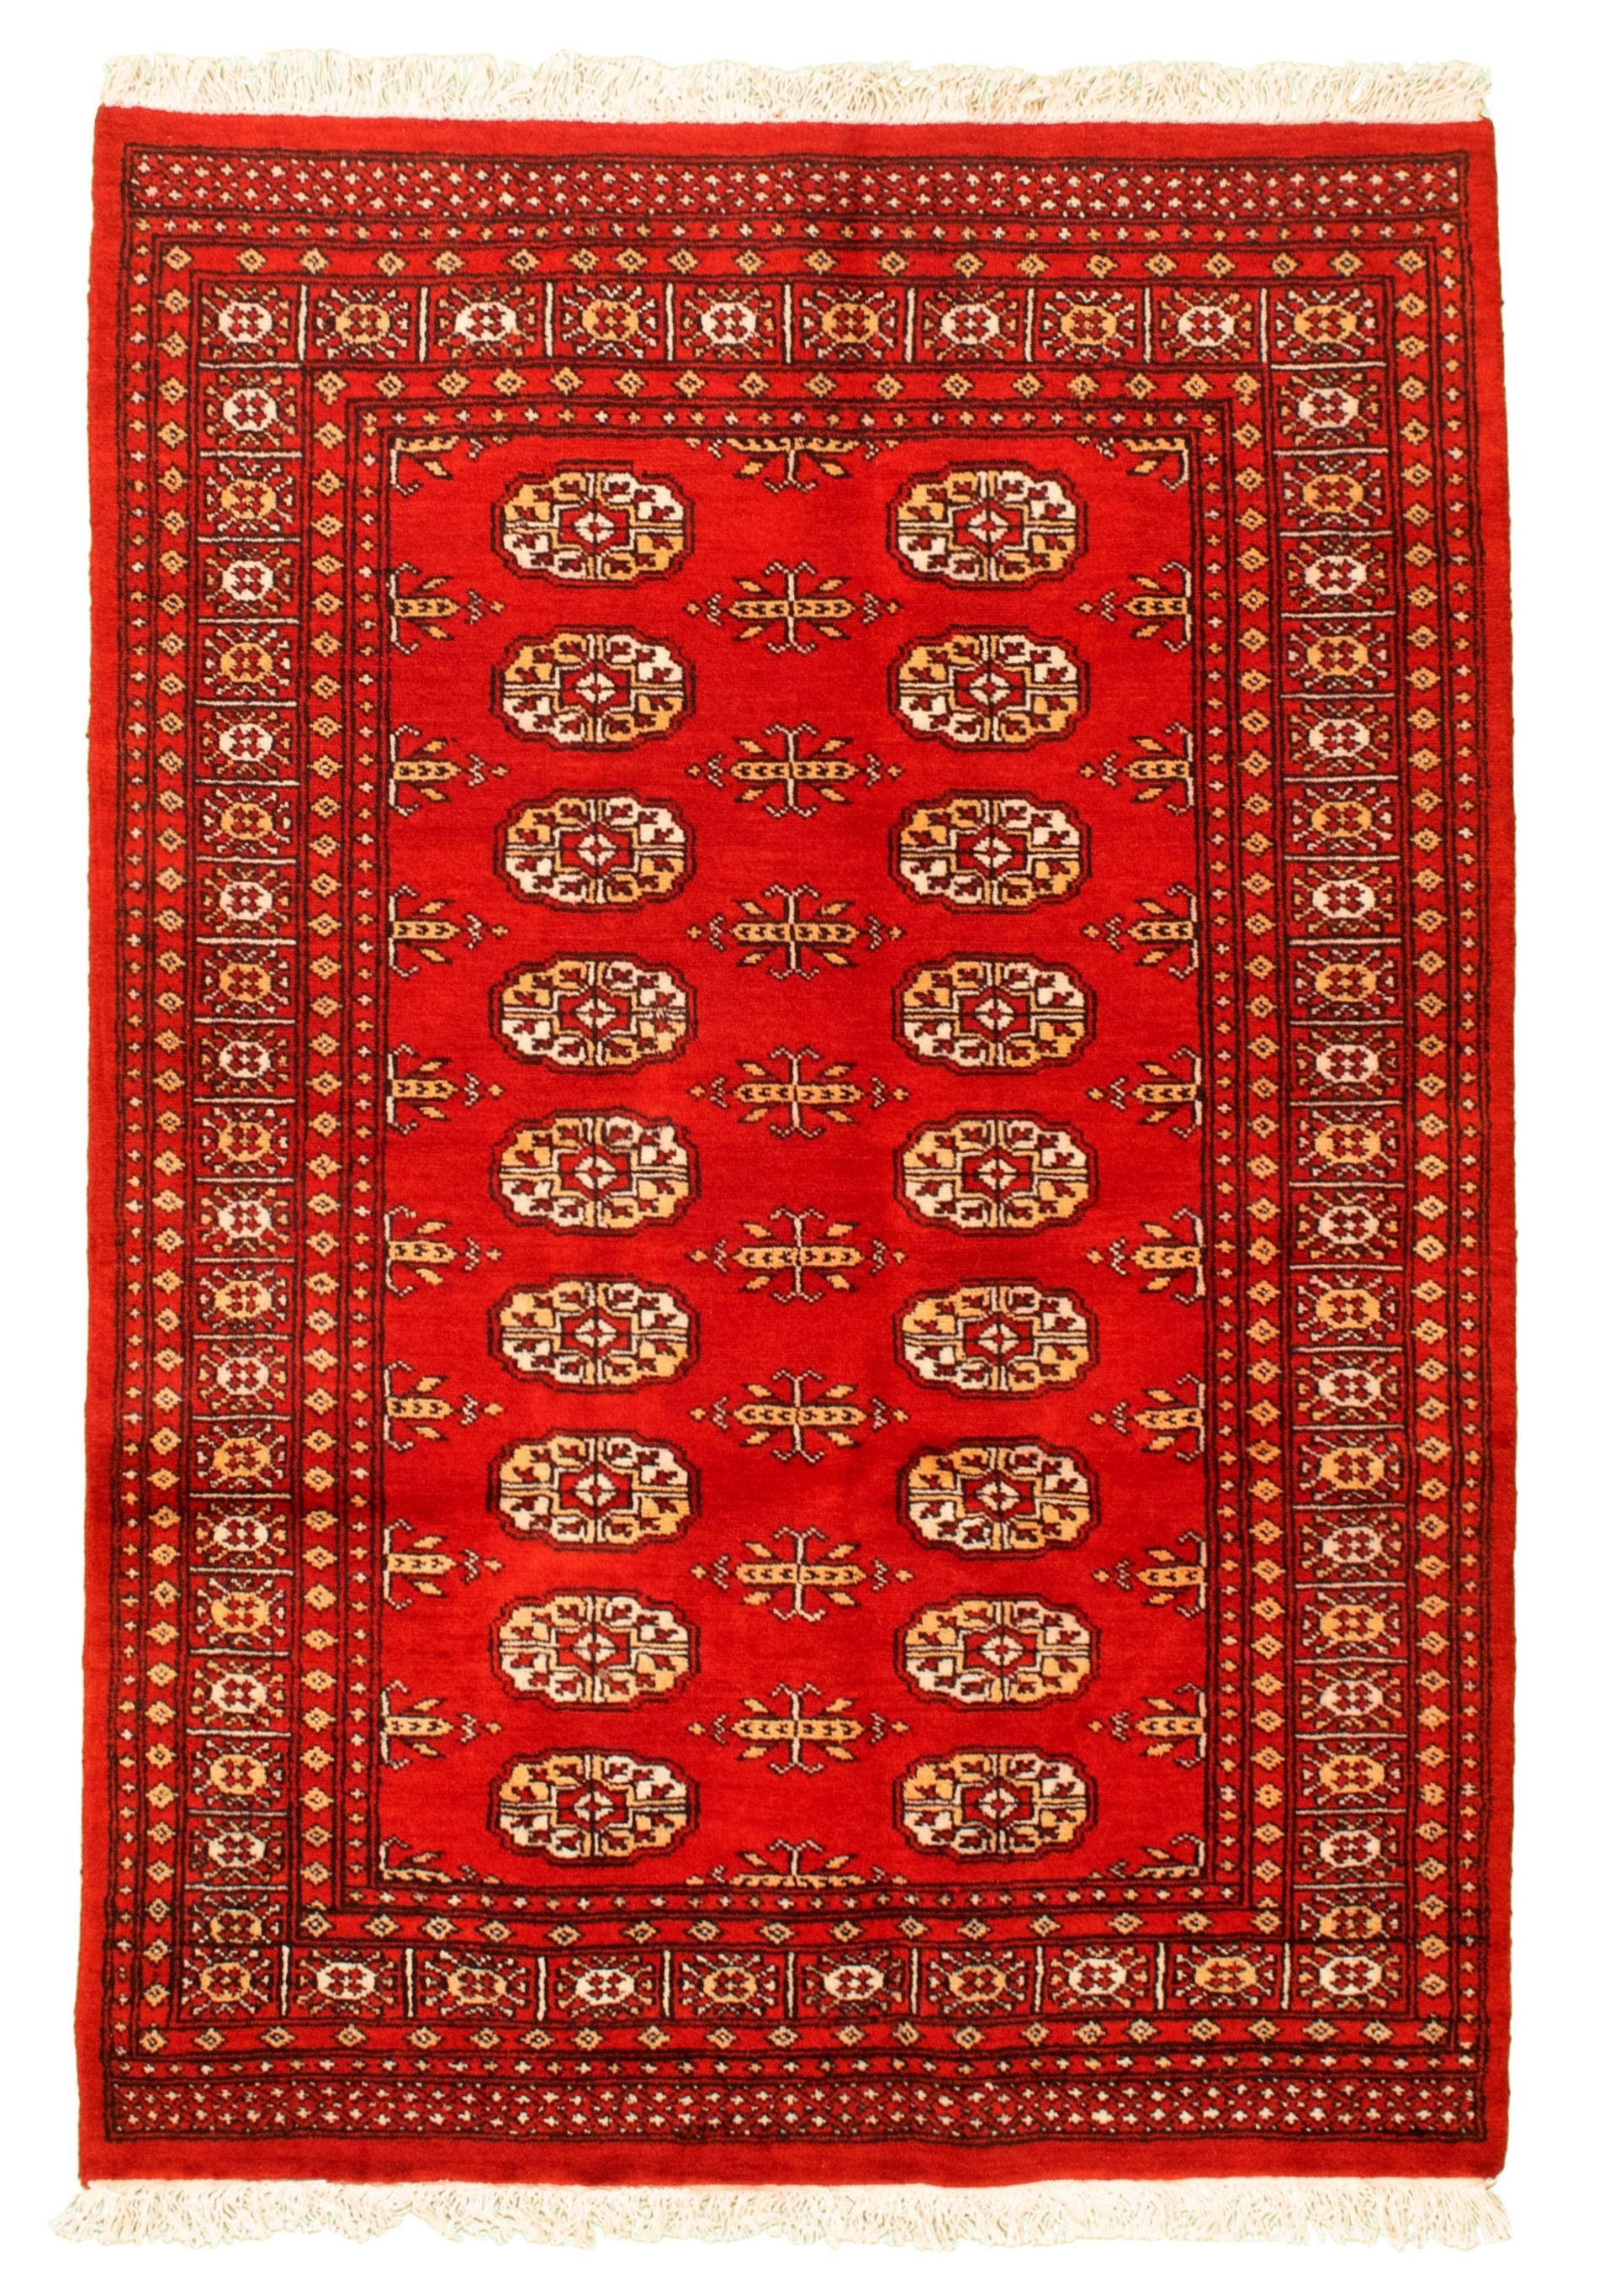 Hand-knotted Finest Peshawar Bokhara Red Wool Rug 4'0" x 5'9"  Size: 4'0" x 5'9"  